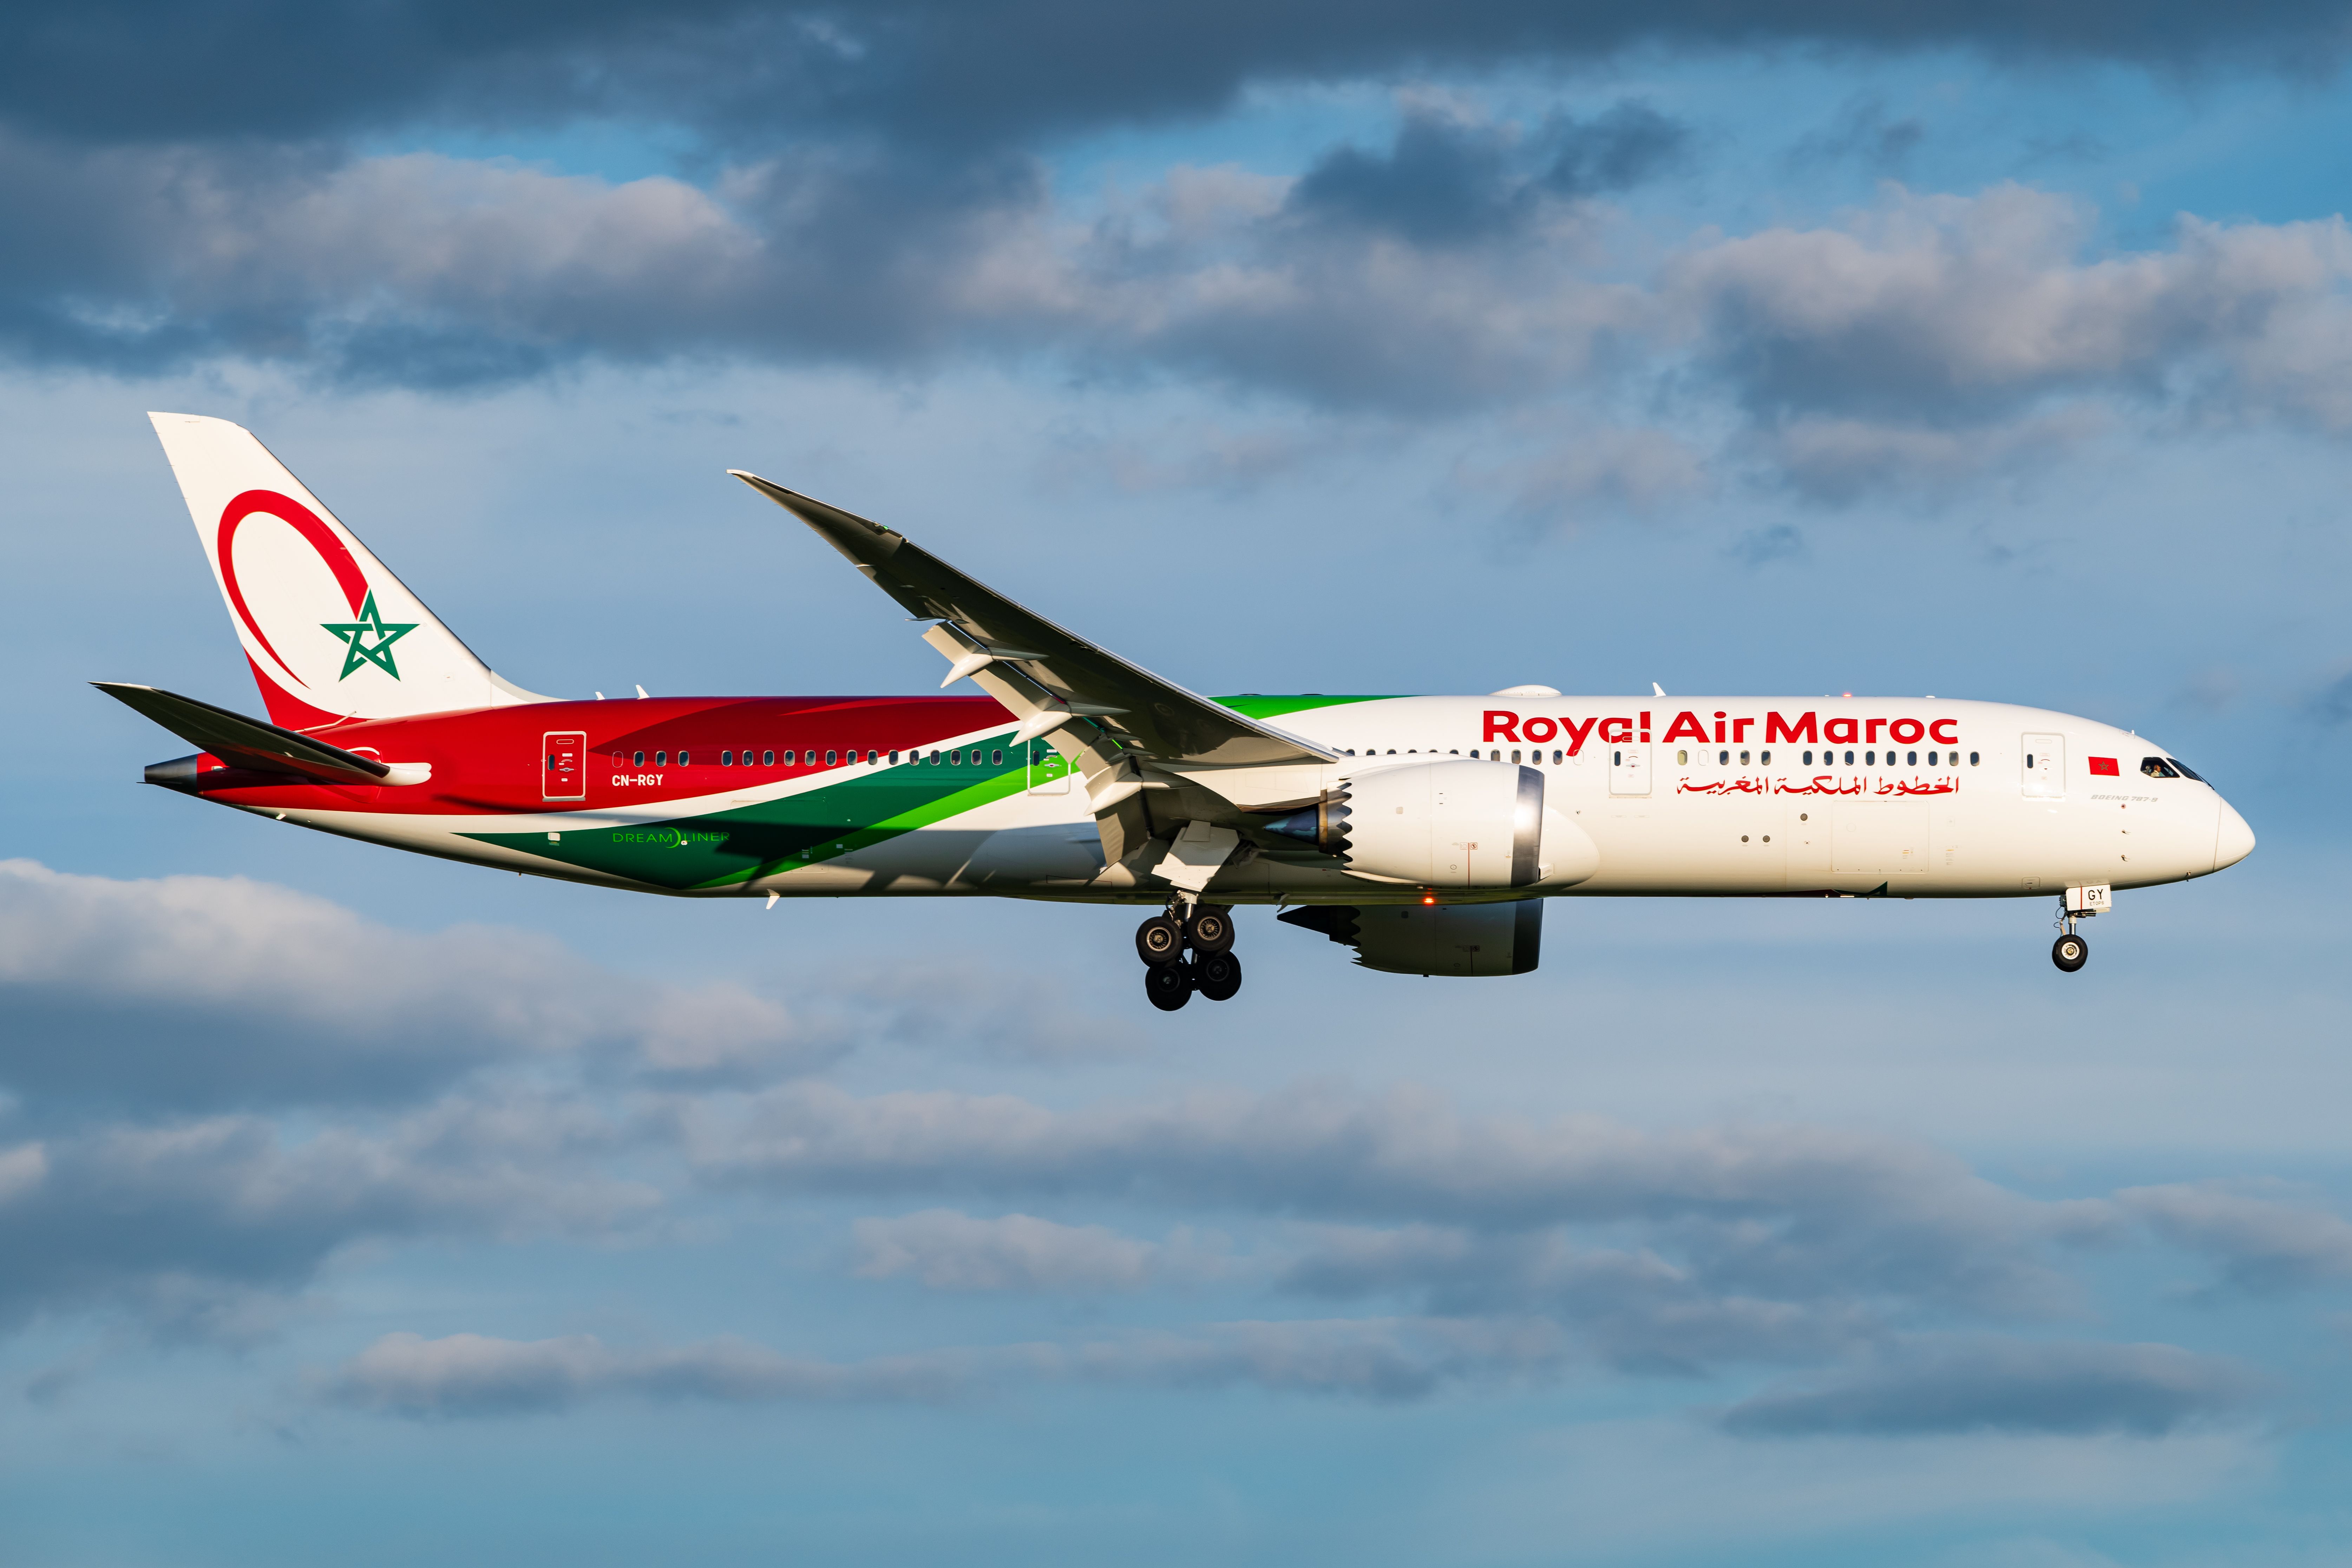 Royal Maroc Is Now Letting Passengers Resell Flight Tickets